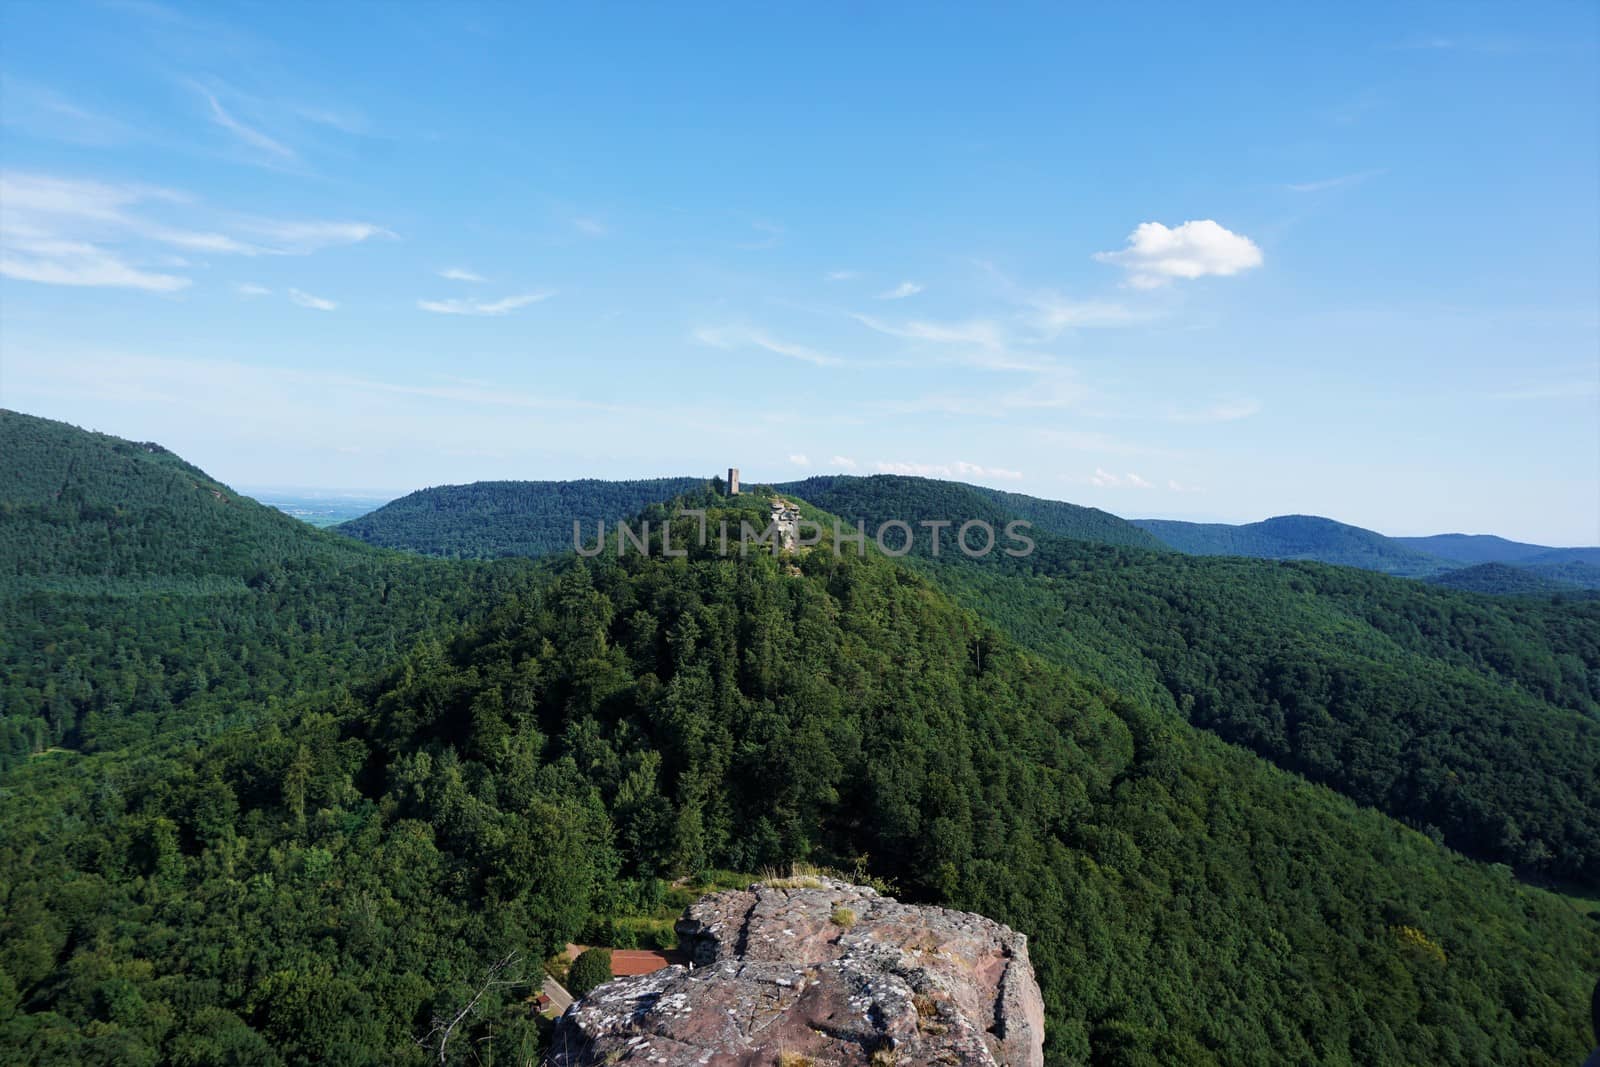 View over the hilly landscape of the Trifels area in Rhineland-Palatinate by pisces2386